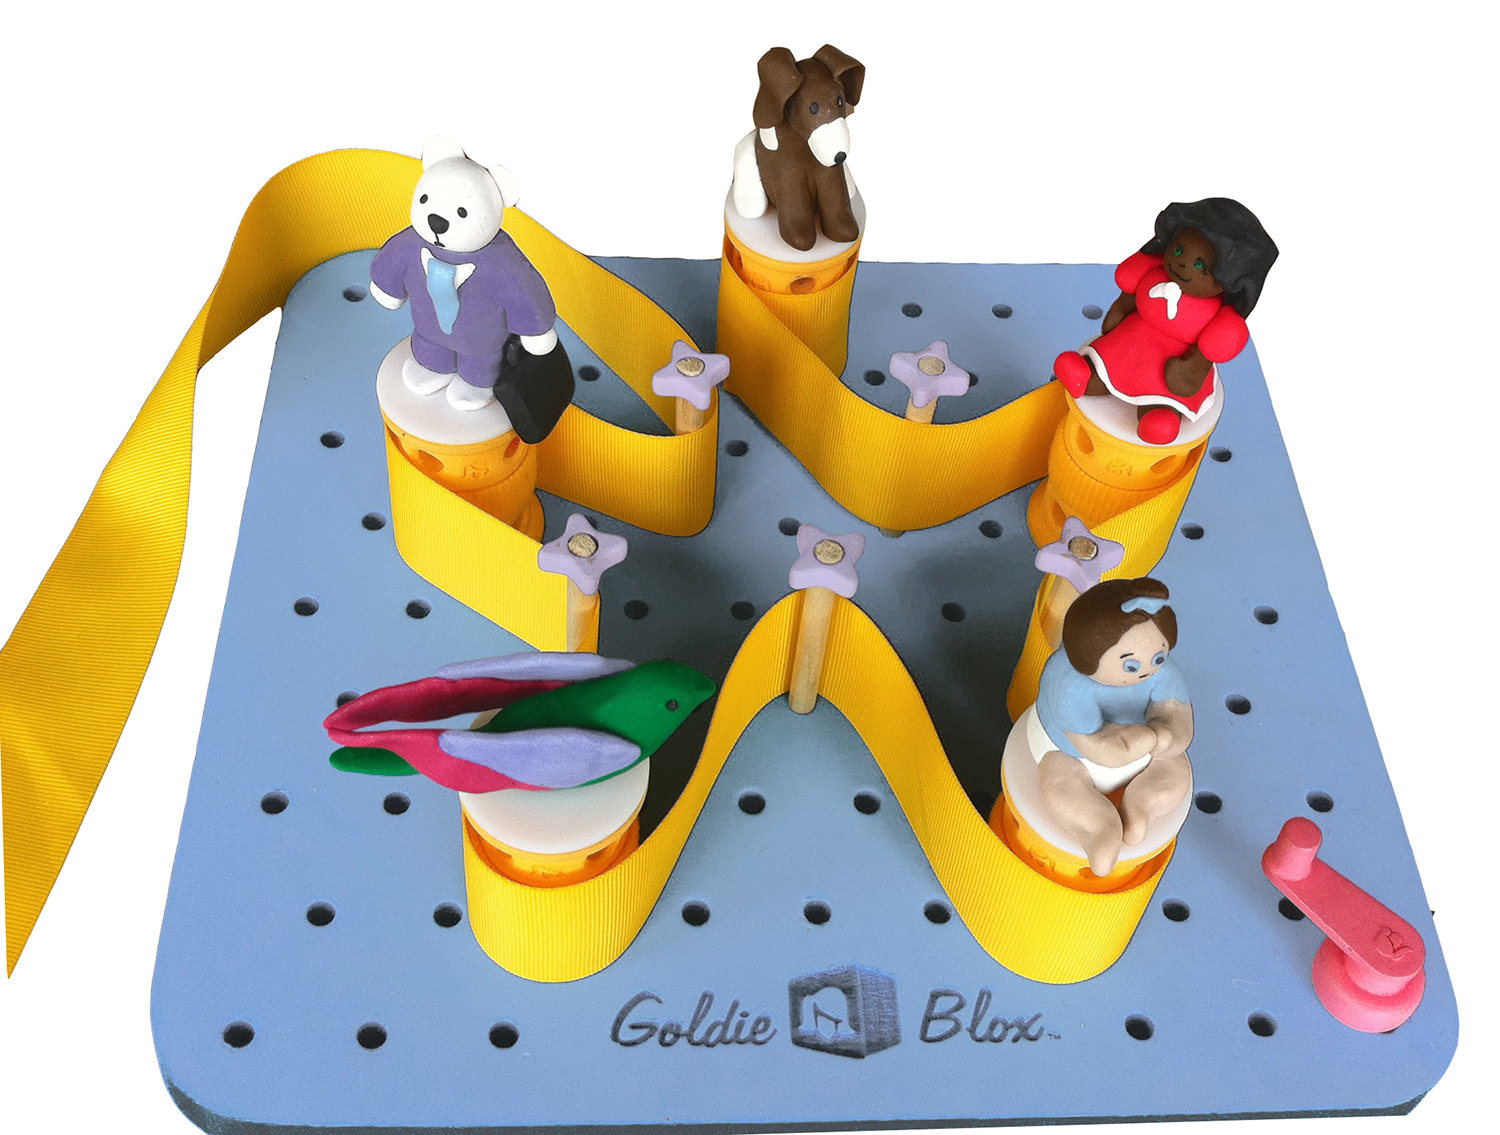 Blue pegboard with GoldieBlox logo. Cylinders topped with clay figurines and wooden dowels are inserted into the holes, and a ribbon is strung around them forming a star shape. There is a crank in the corner of the pegboard.